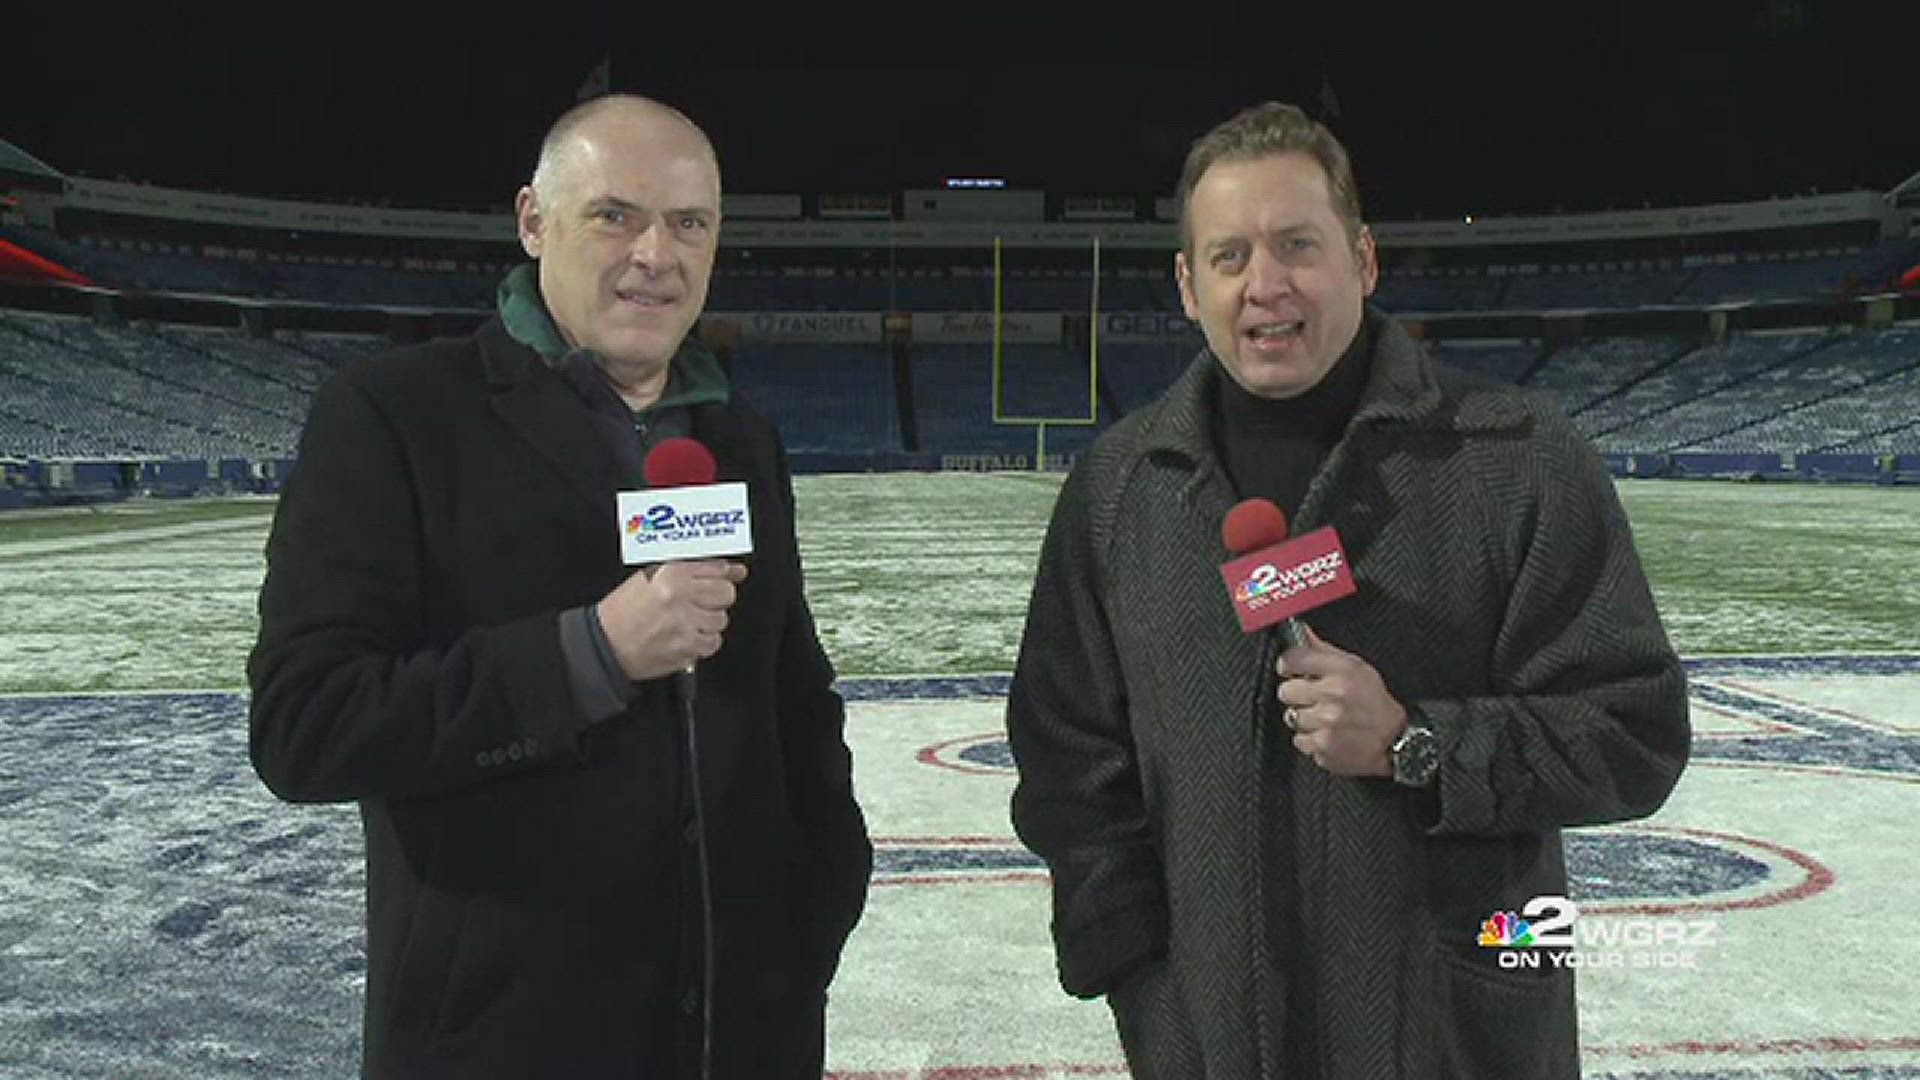 WGRZ Sports Director Adam Benigni and Bills/NFL Insider Vic Carucci say annual playoff trips are now the expectation in Orchard Park.